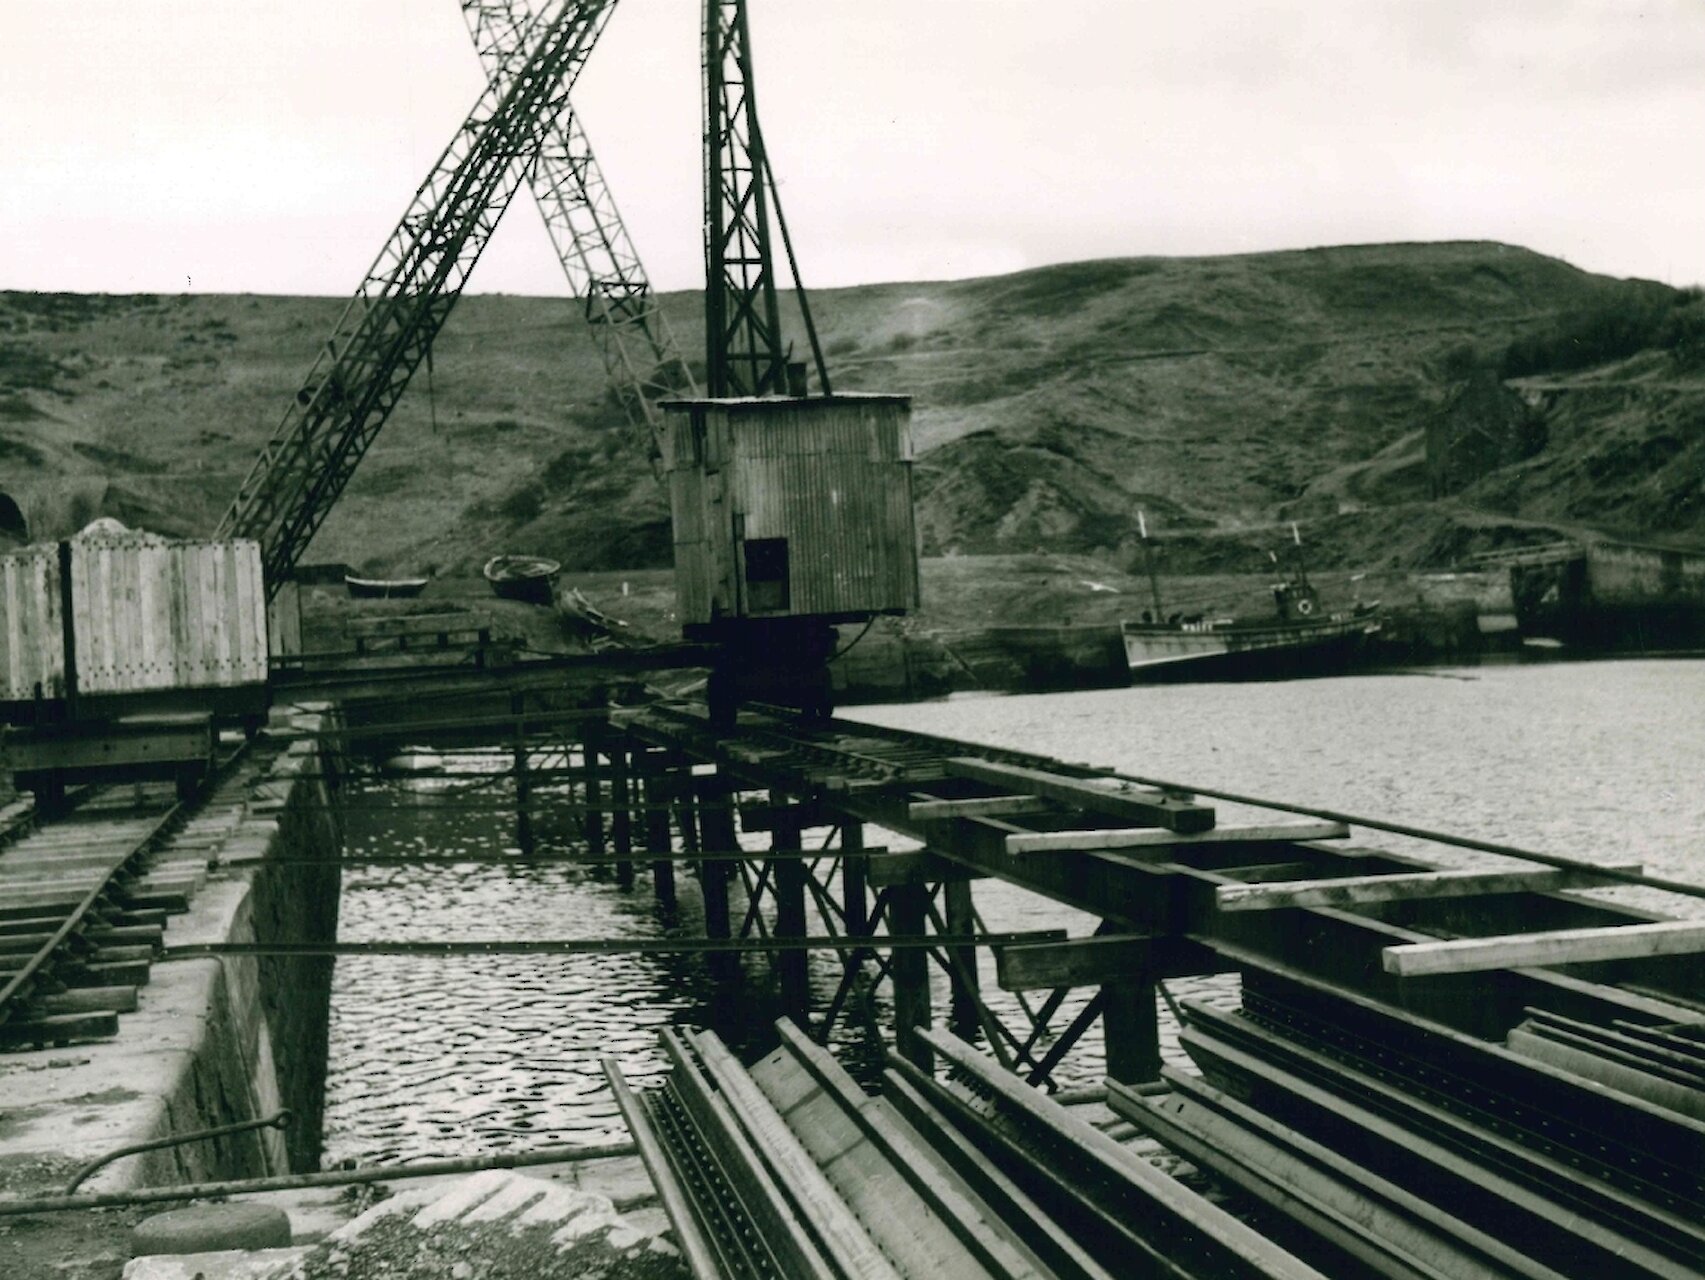 Construction of a quay at Lybster, Caithness - 1950